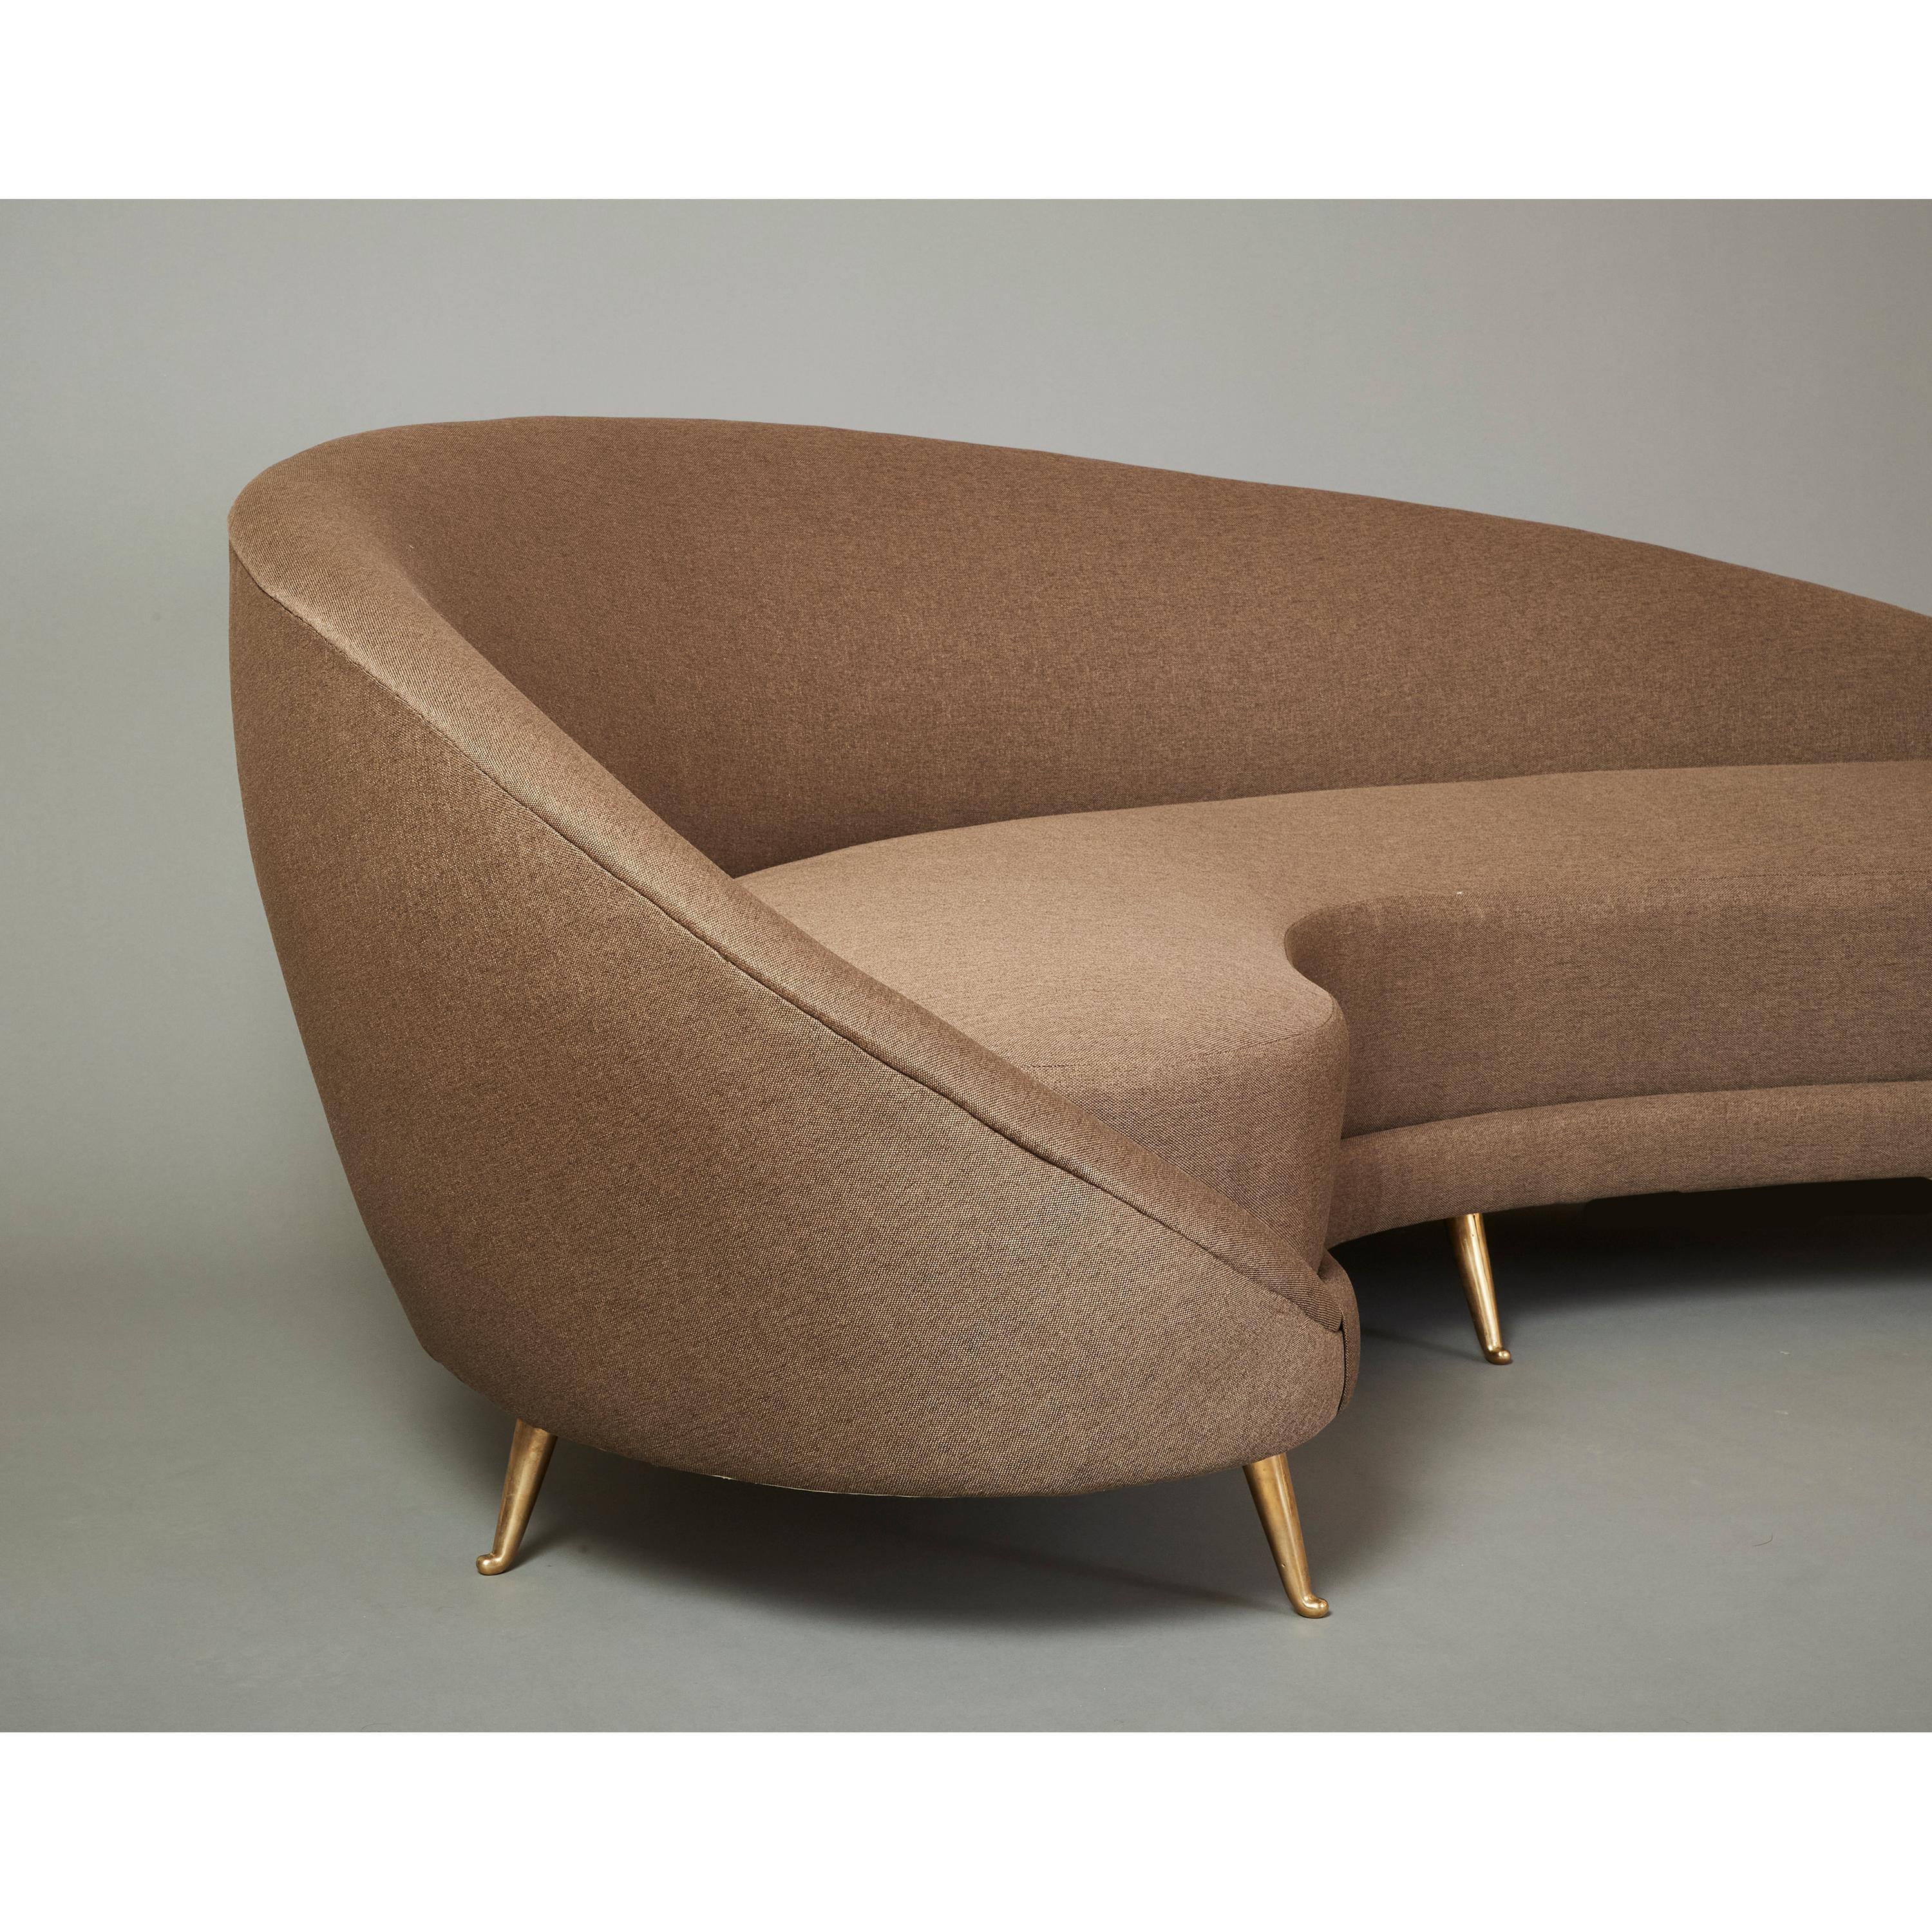 Federico Munari Curved Boomerang Sofa with Polished Brass Legs, Italy 1950's For Sale 7